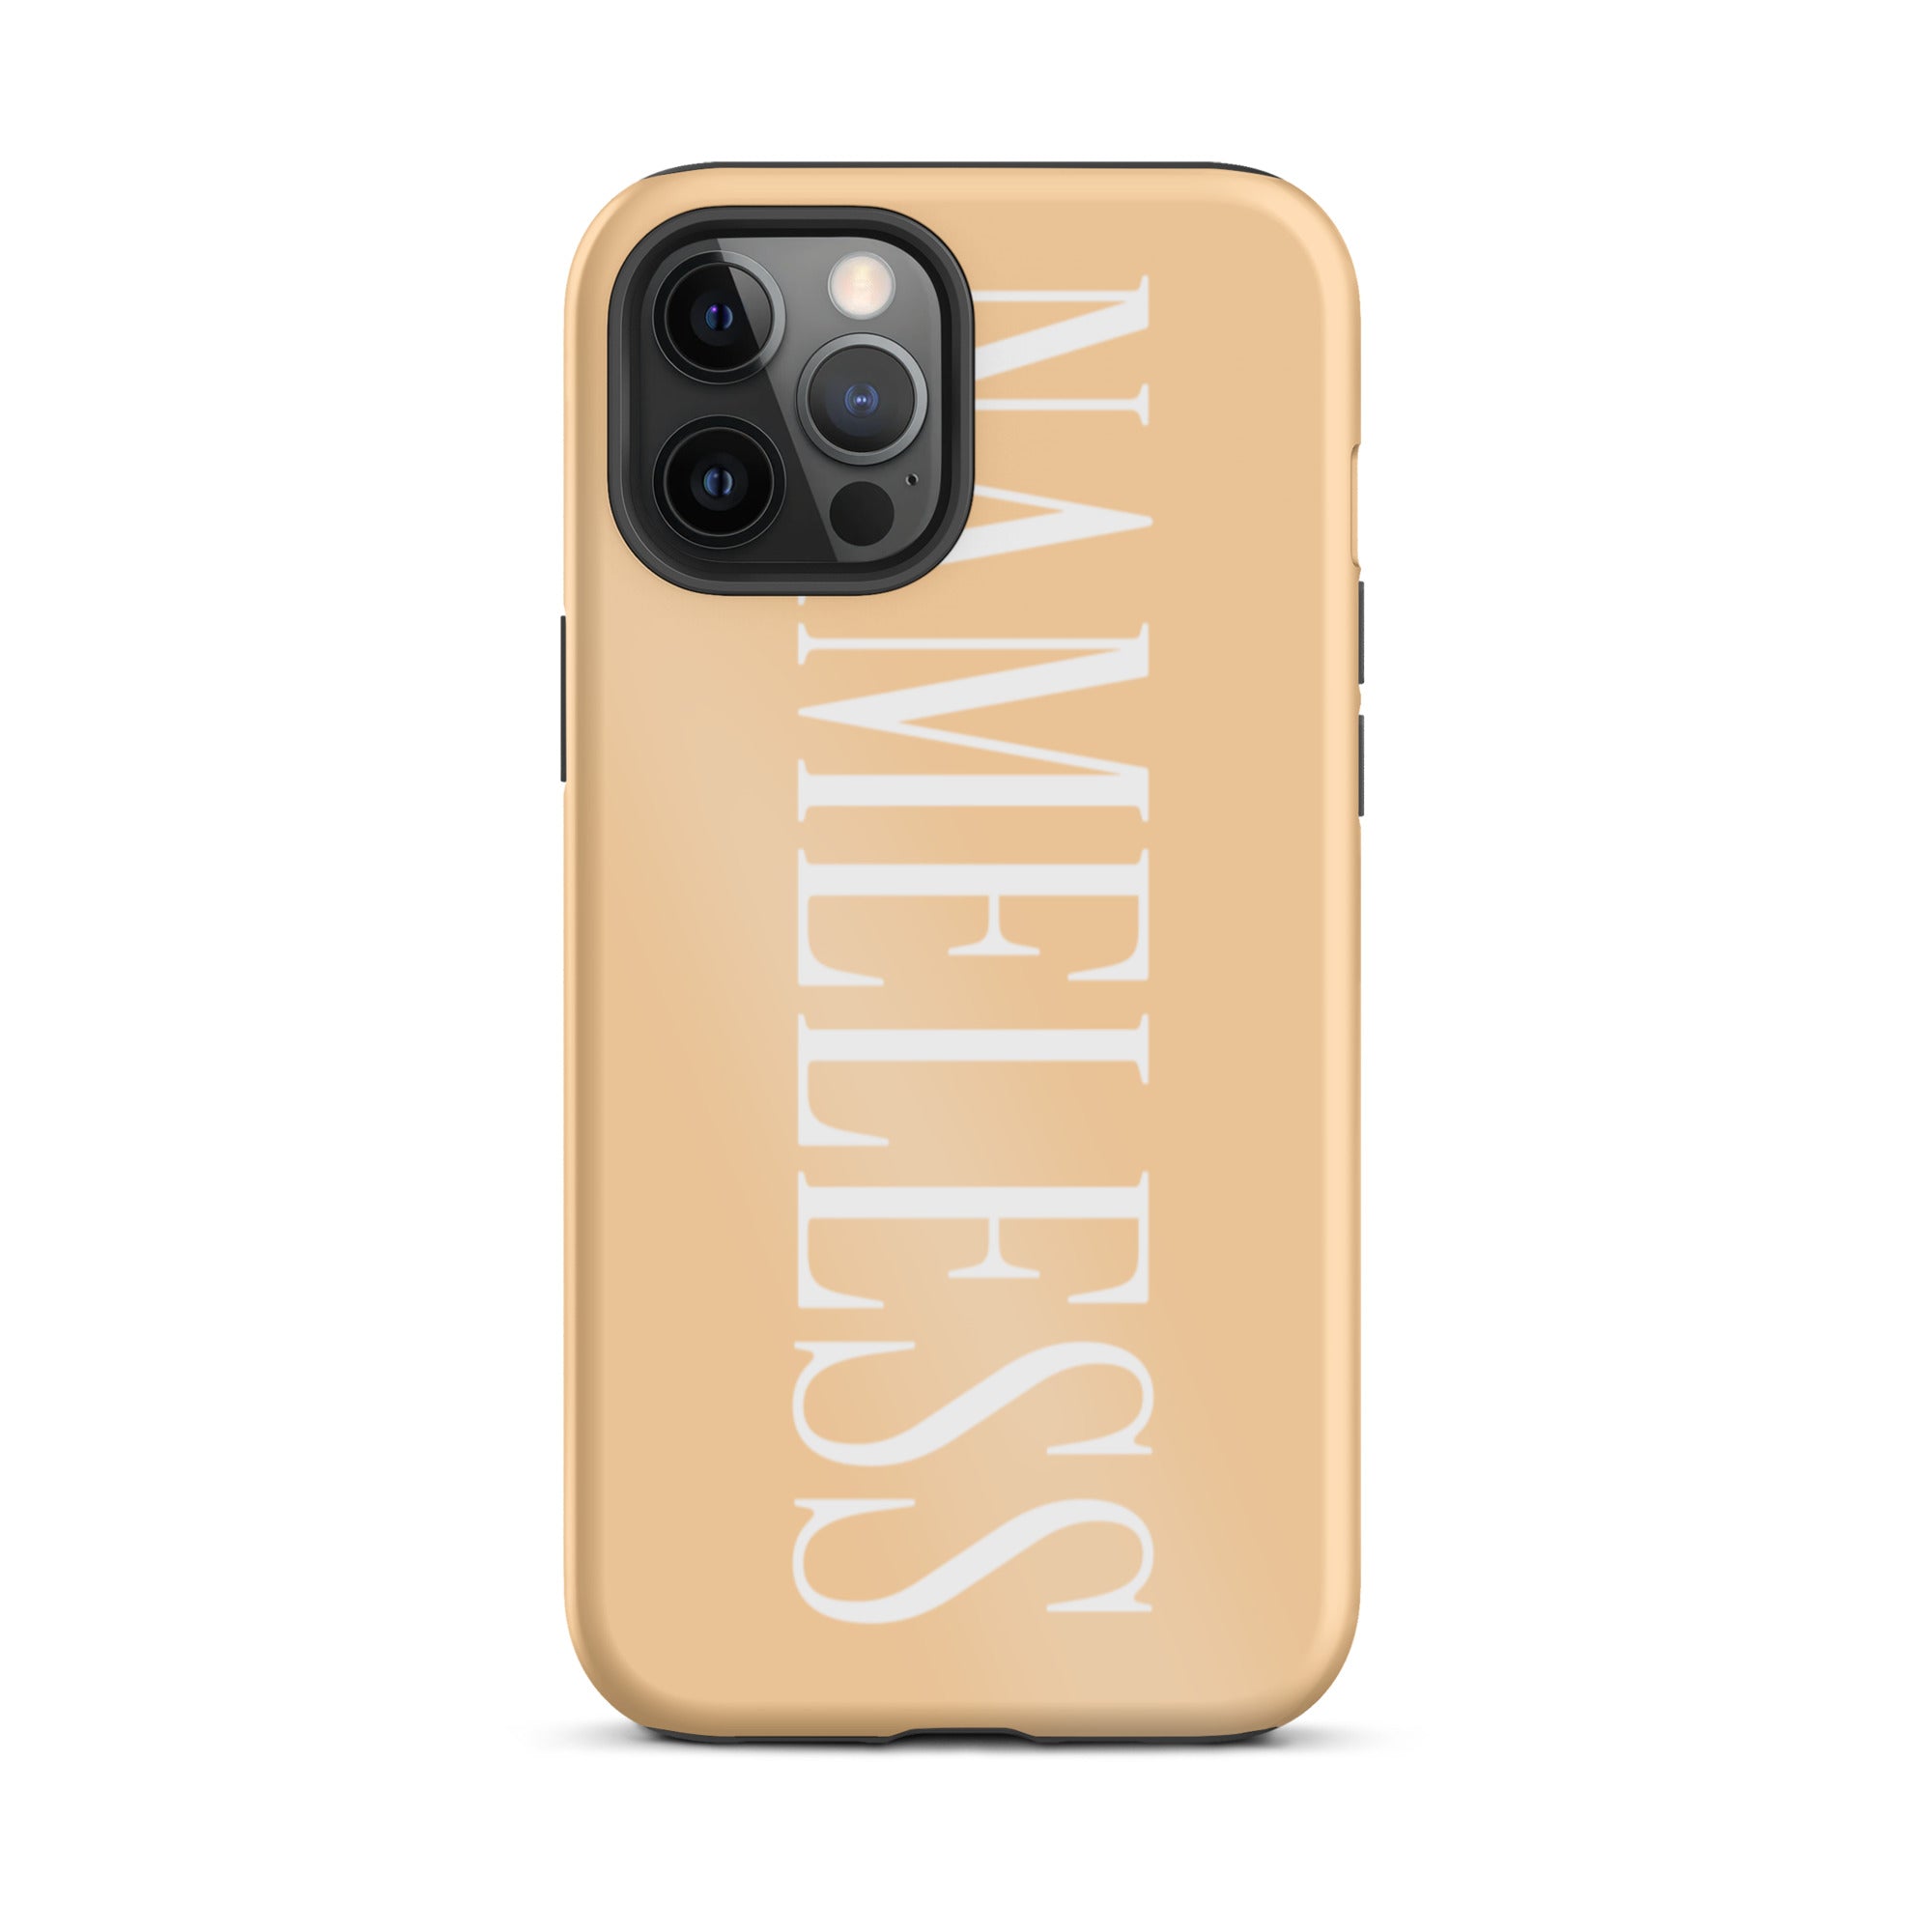 NAMELESS IPHONE CASE [NUDE]